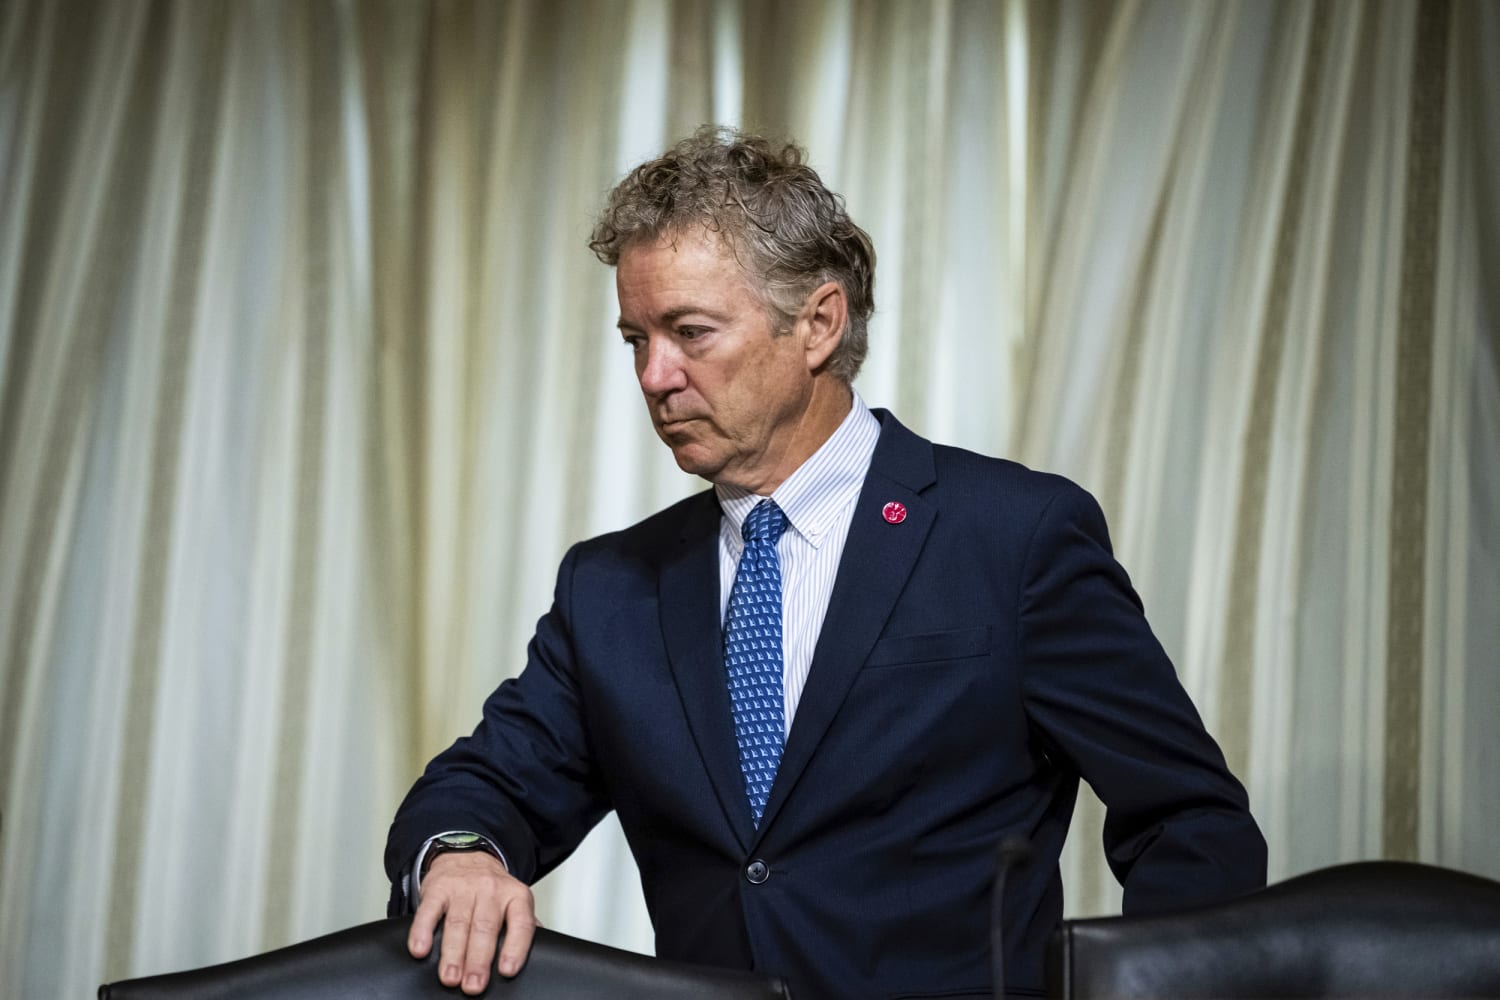 Sen. Rand Paul says his aide was 'brutally attacked' in D.C.